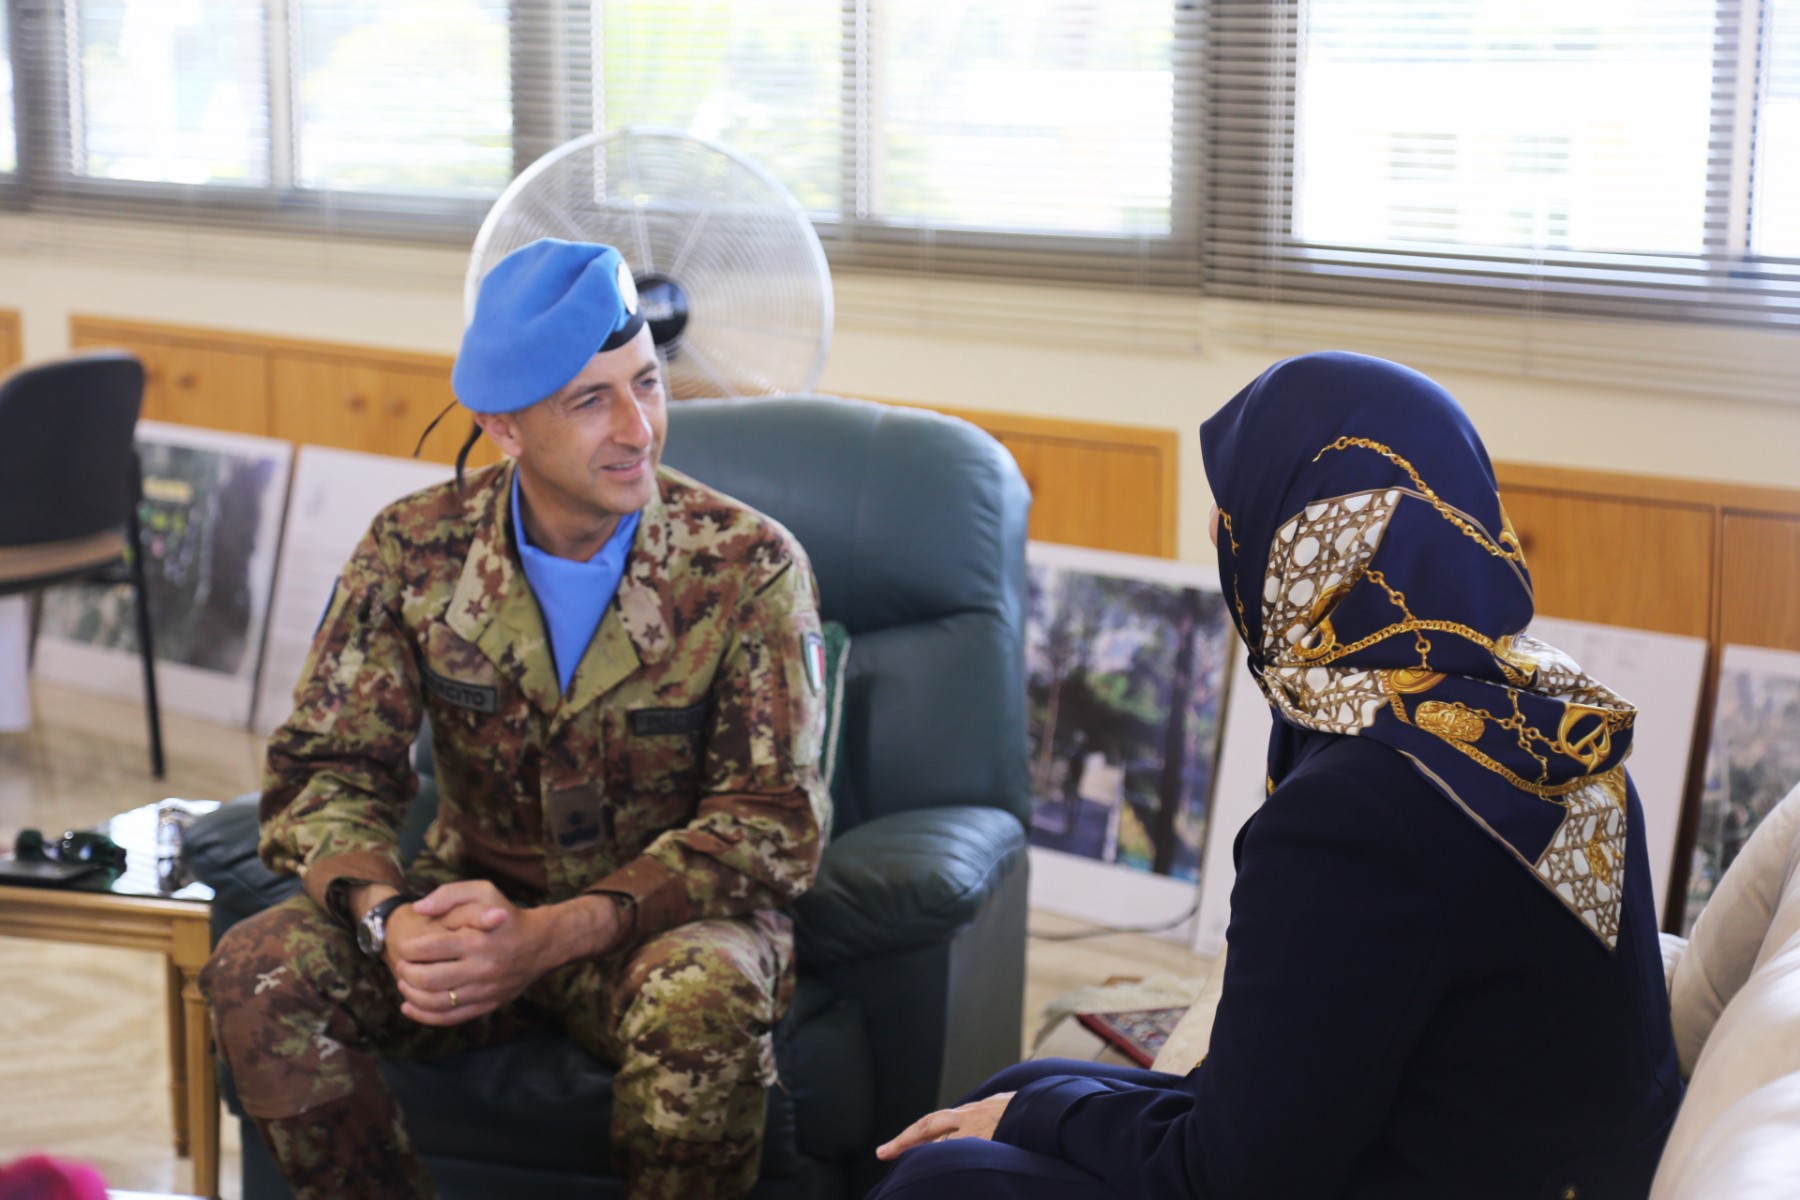 The Commander of the Western Sector of the UNIFIL Visits The Cultural Compound